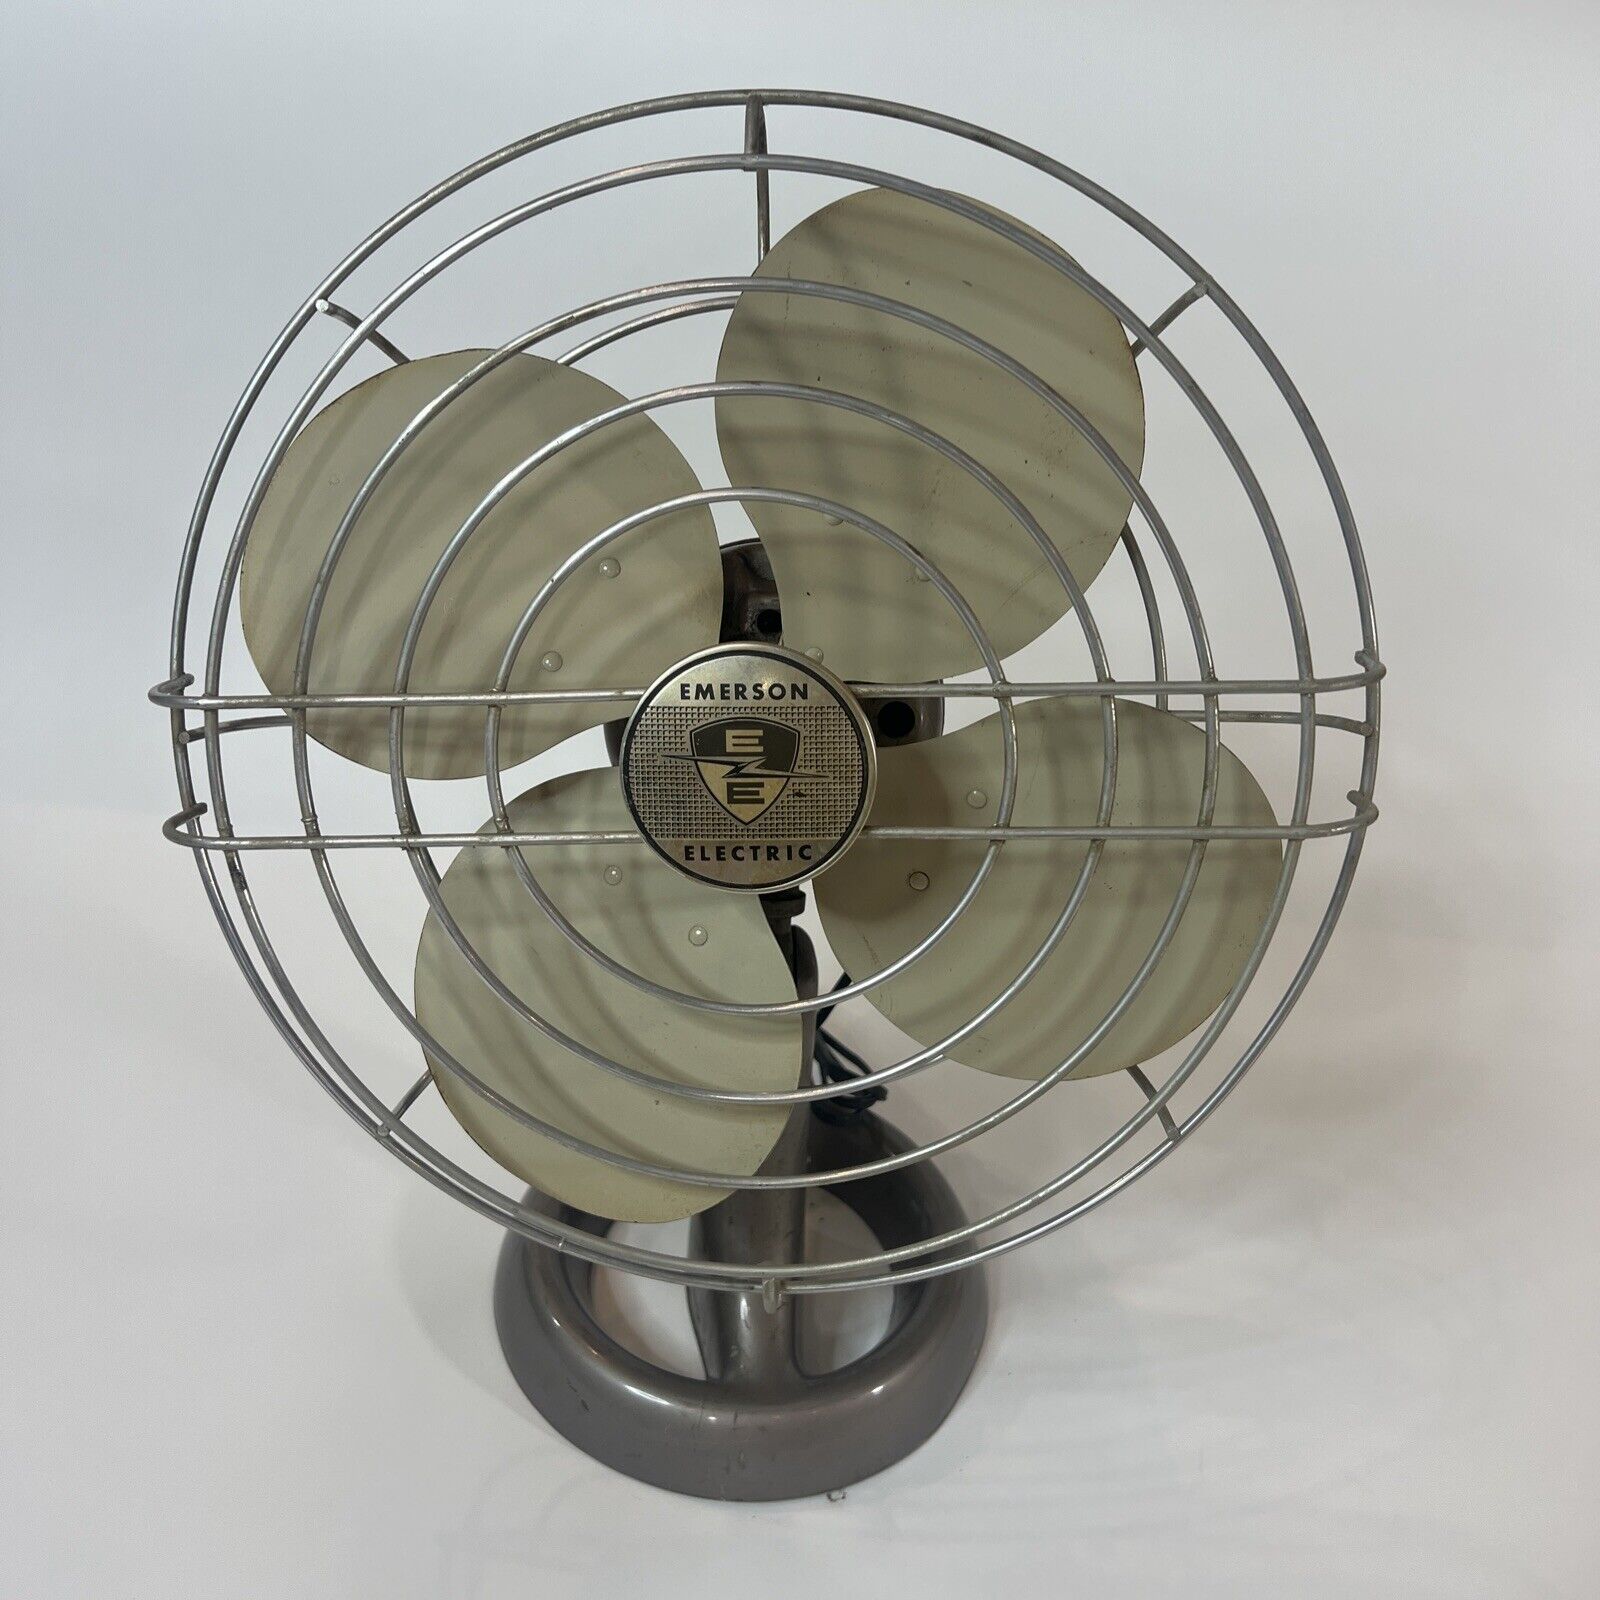 Antique Vintage Emerson Electric Northwind Fan 60 Cycle 115 V Two Speed Working